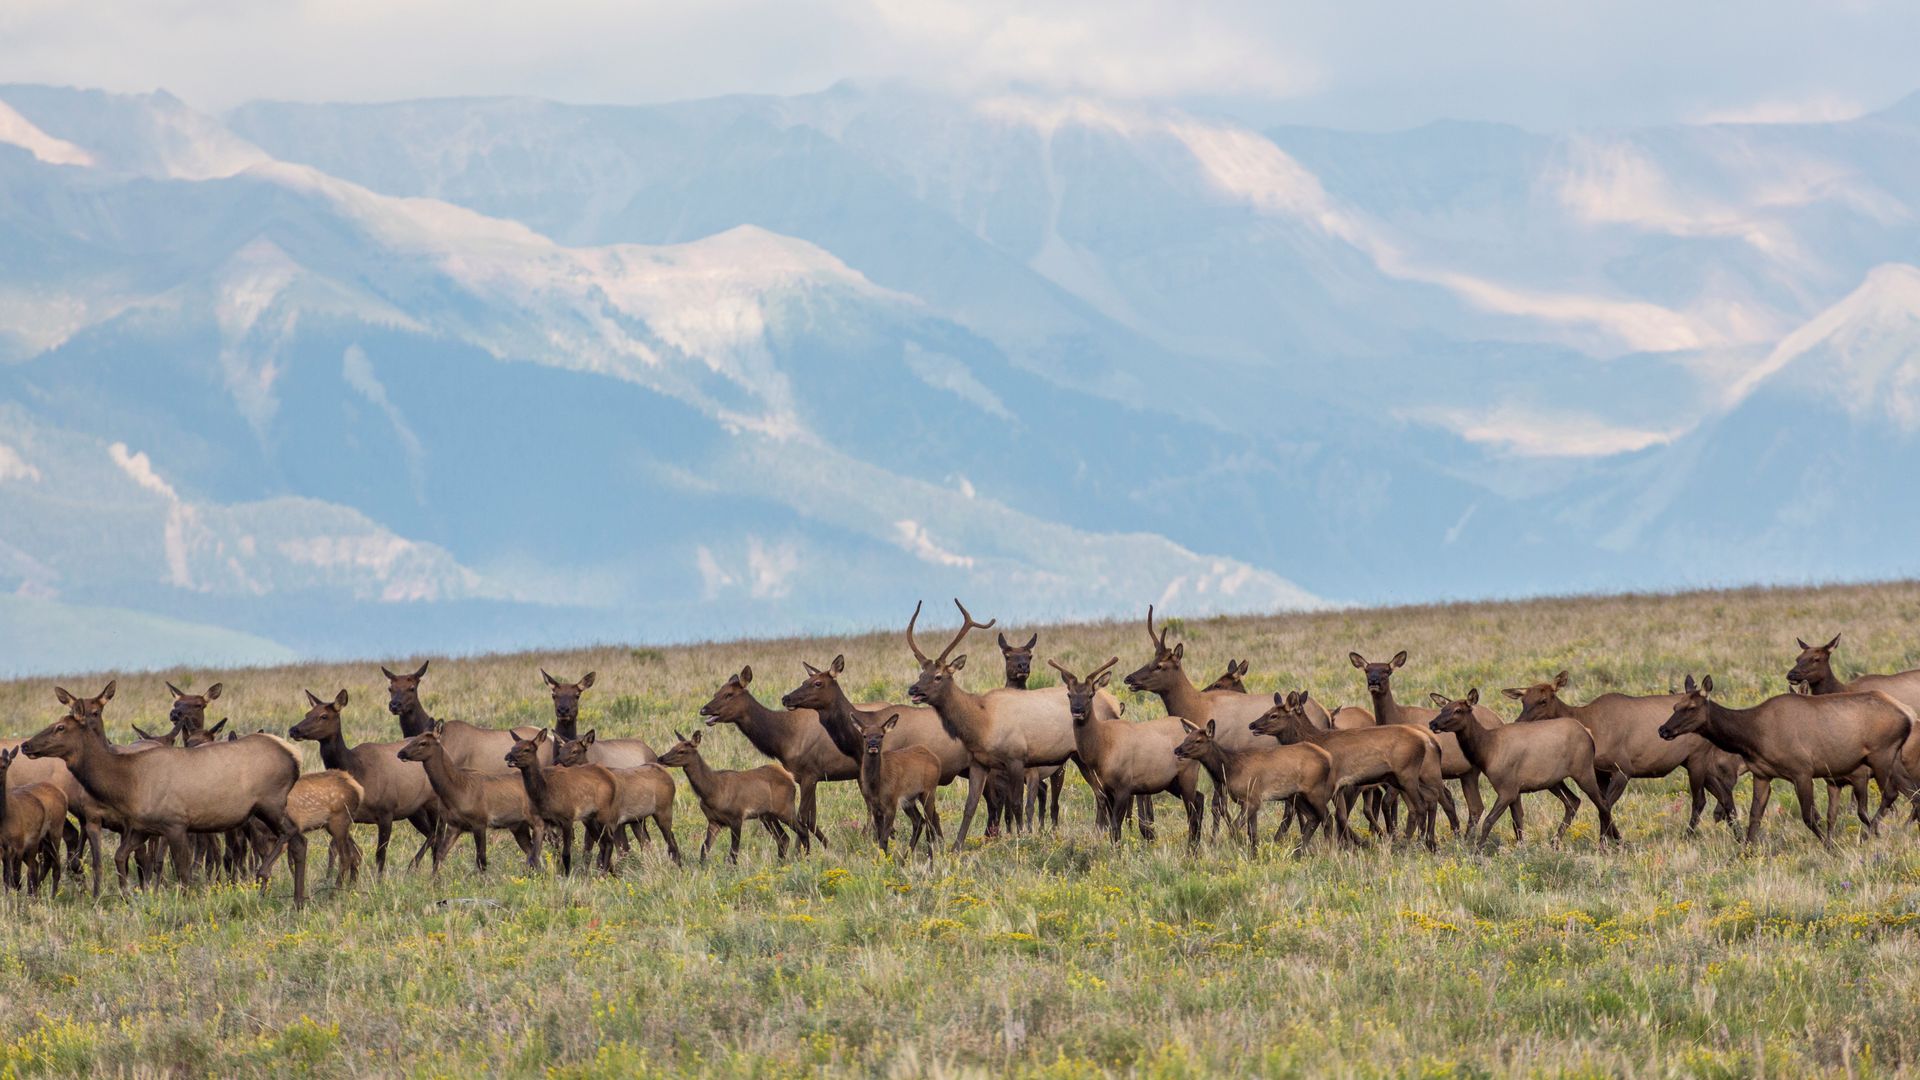 Magnificent elk stampede across Colorado mountains during migration